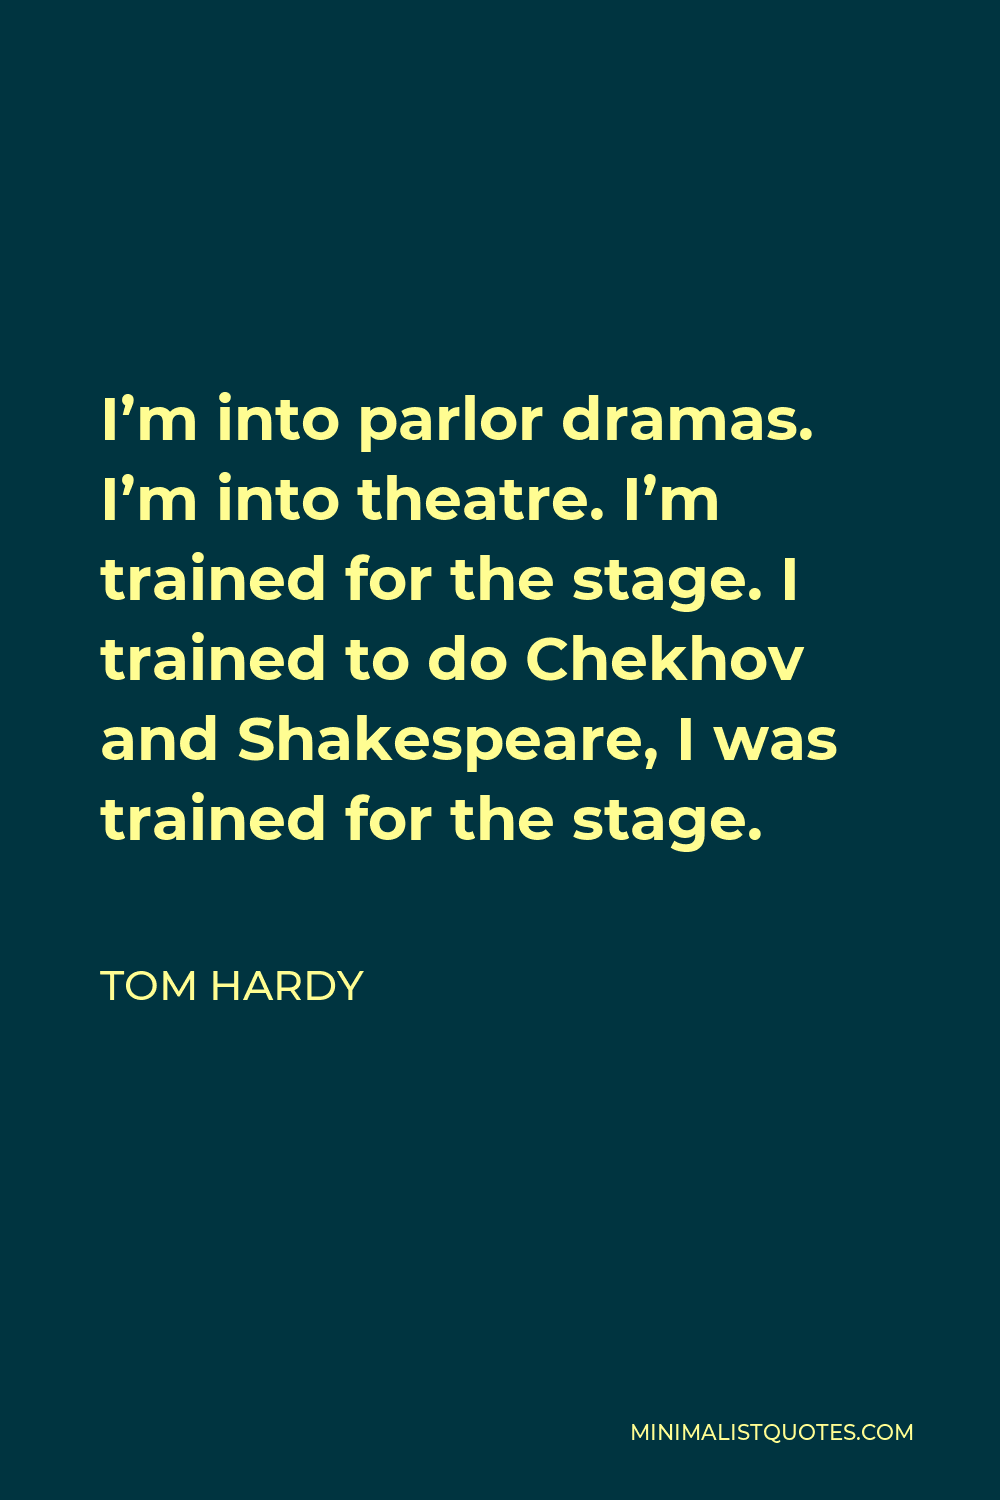 Tom Hardy Quote - I’m into parlor dramas. I’m into theatre. I’m trained for the stage. I trained to do Chekhov and Shakespeare, I was trained for the stage.